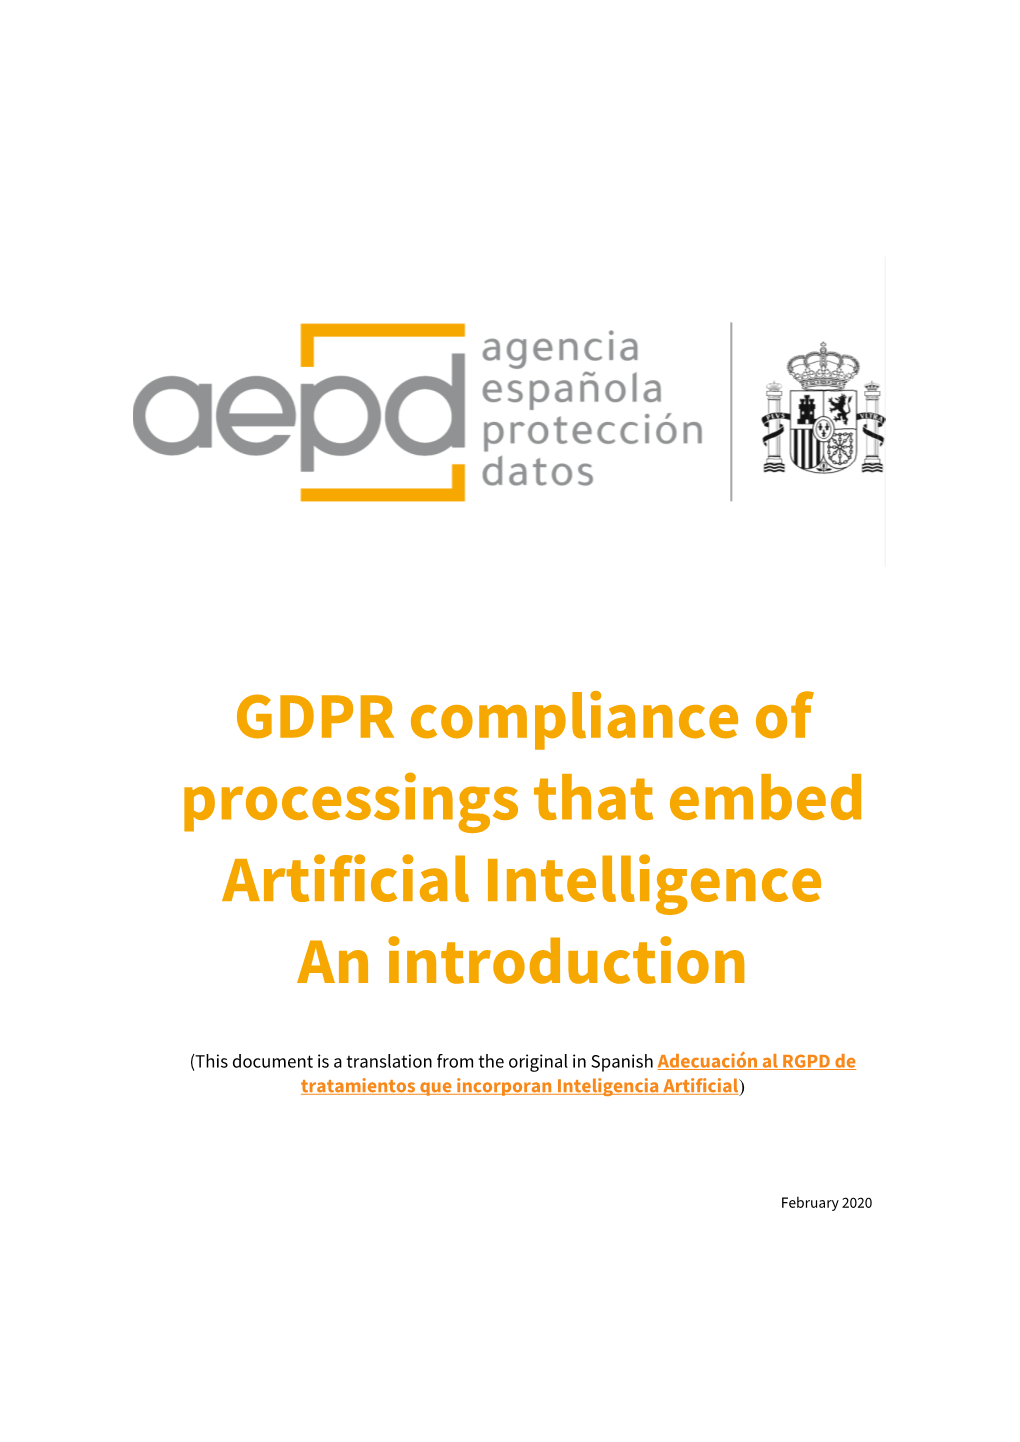 RGPD Compliance of Processings That Embed Artificial Intelligence